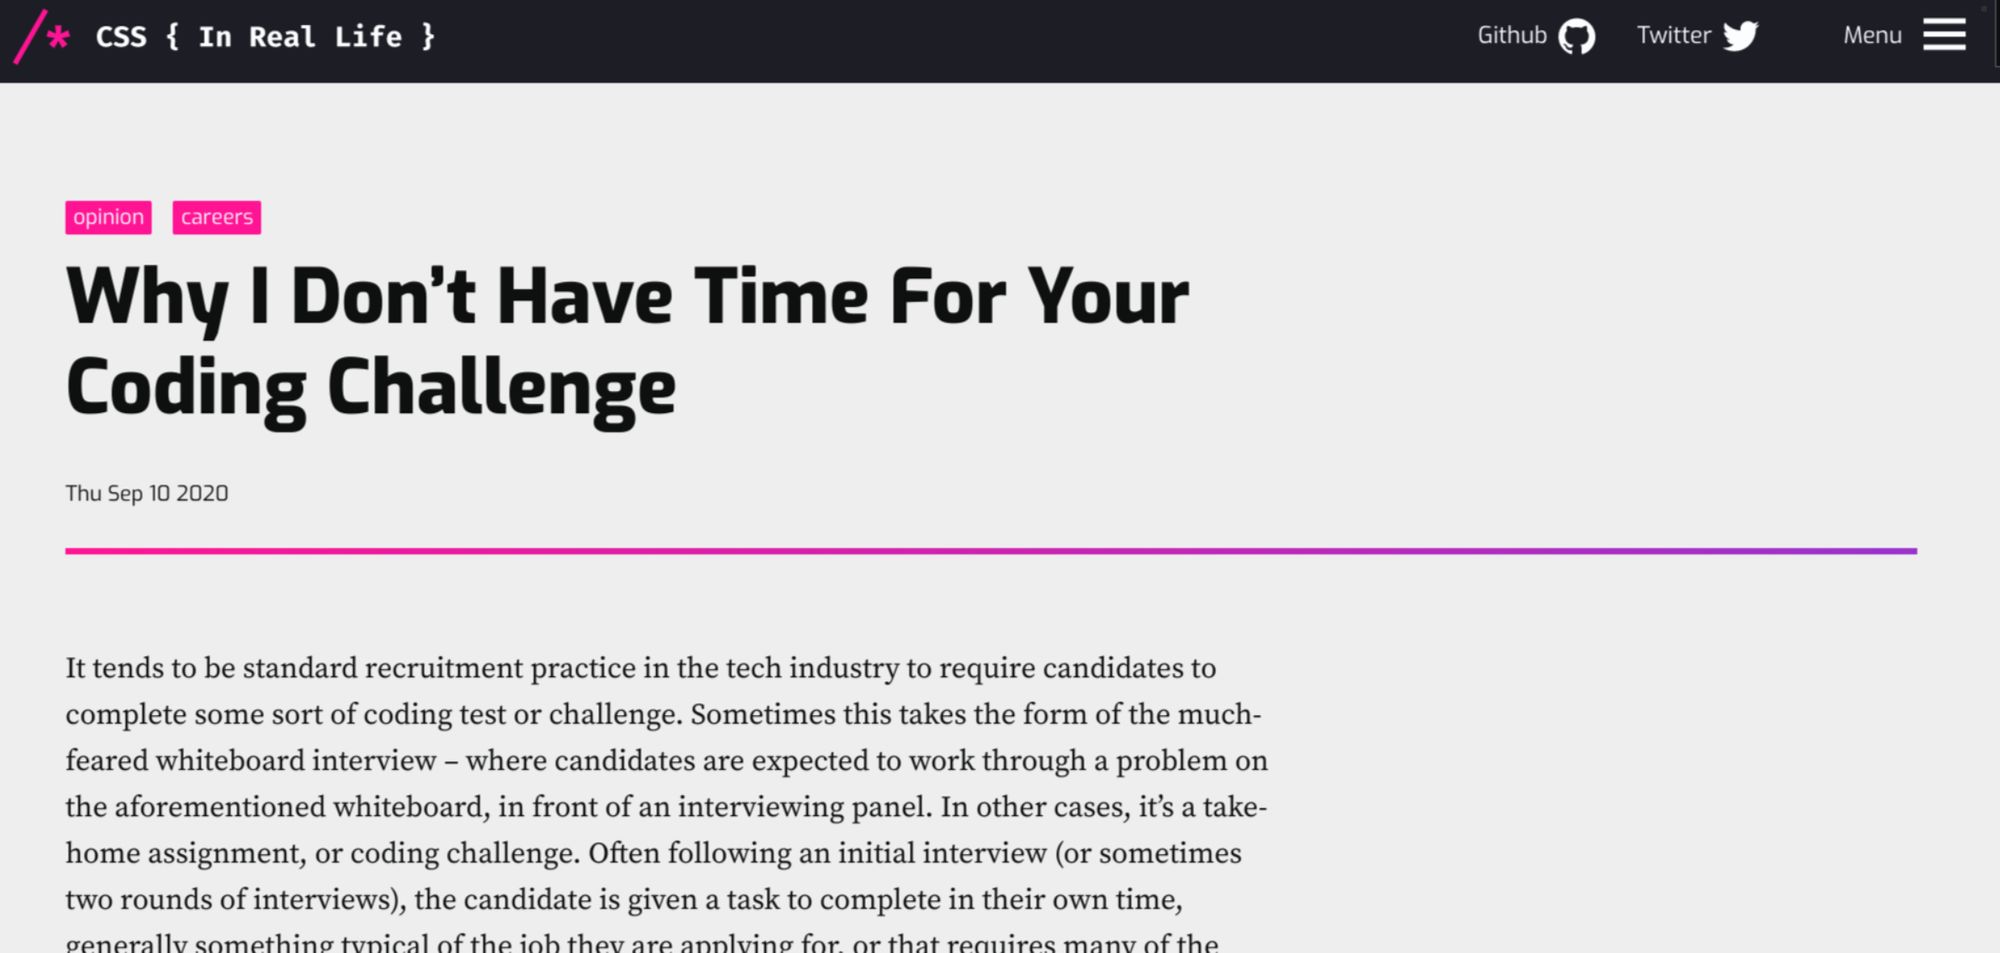 blog post: "Why I don't have time for your coding challenge"